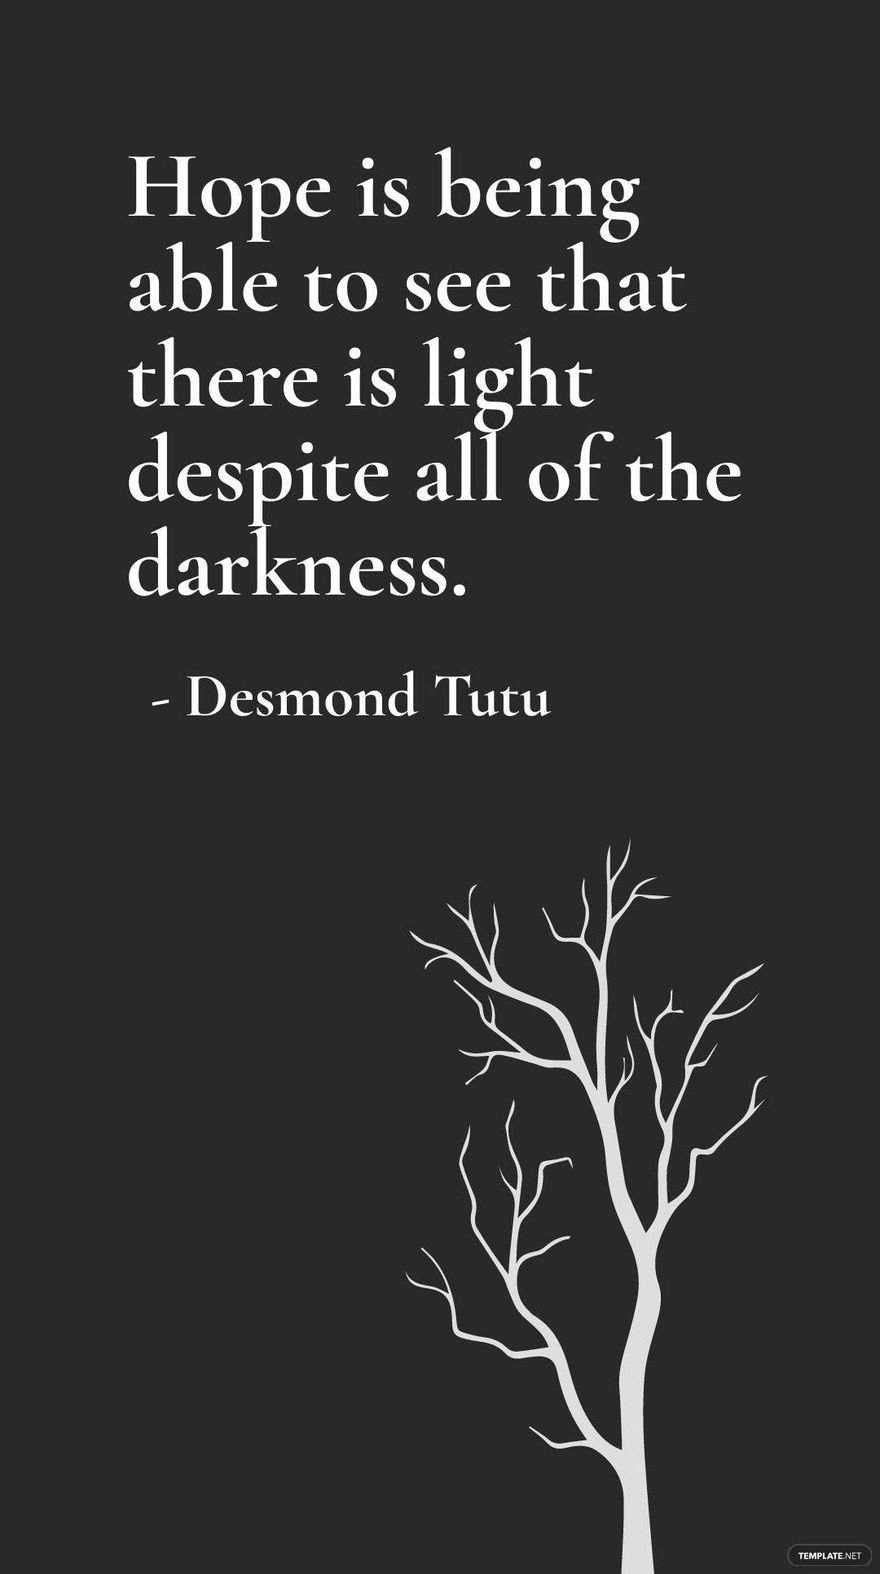 Desmond Tutu - Hope is being able to see that there is light despite all of the darkness.